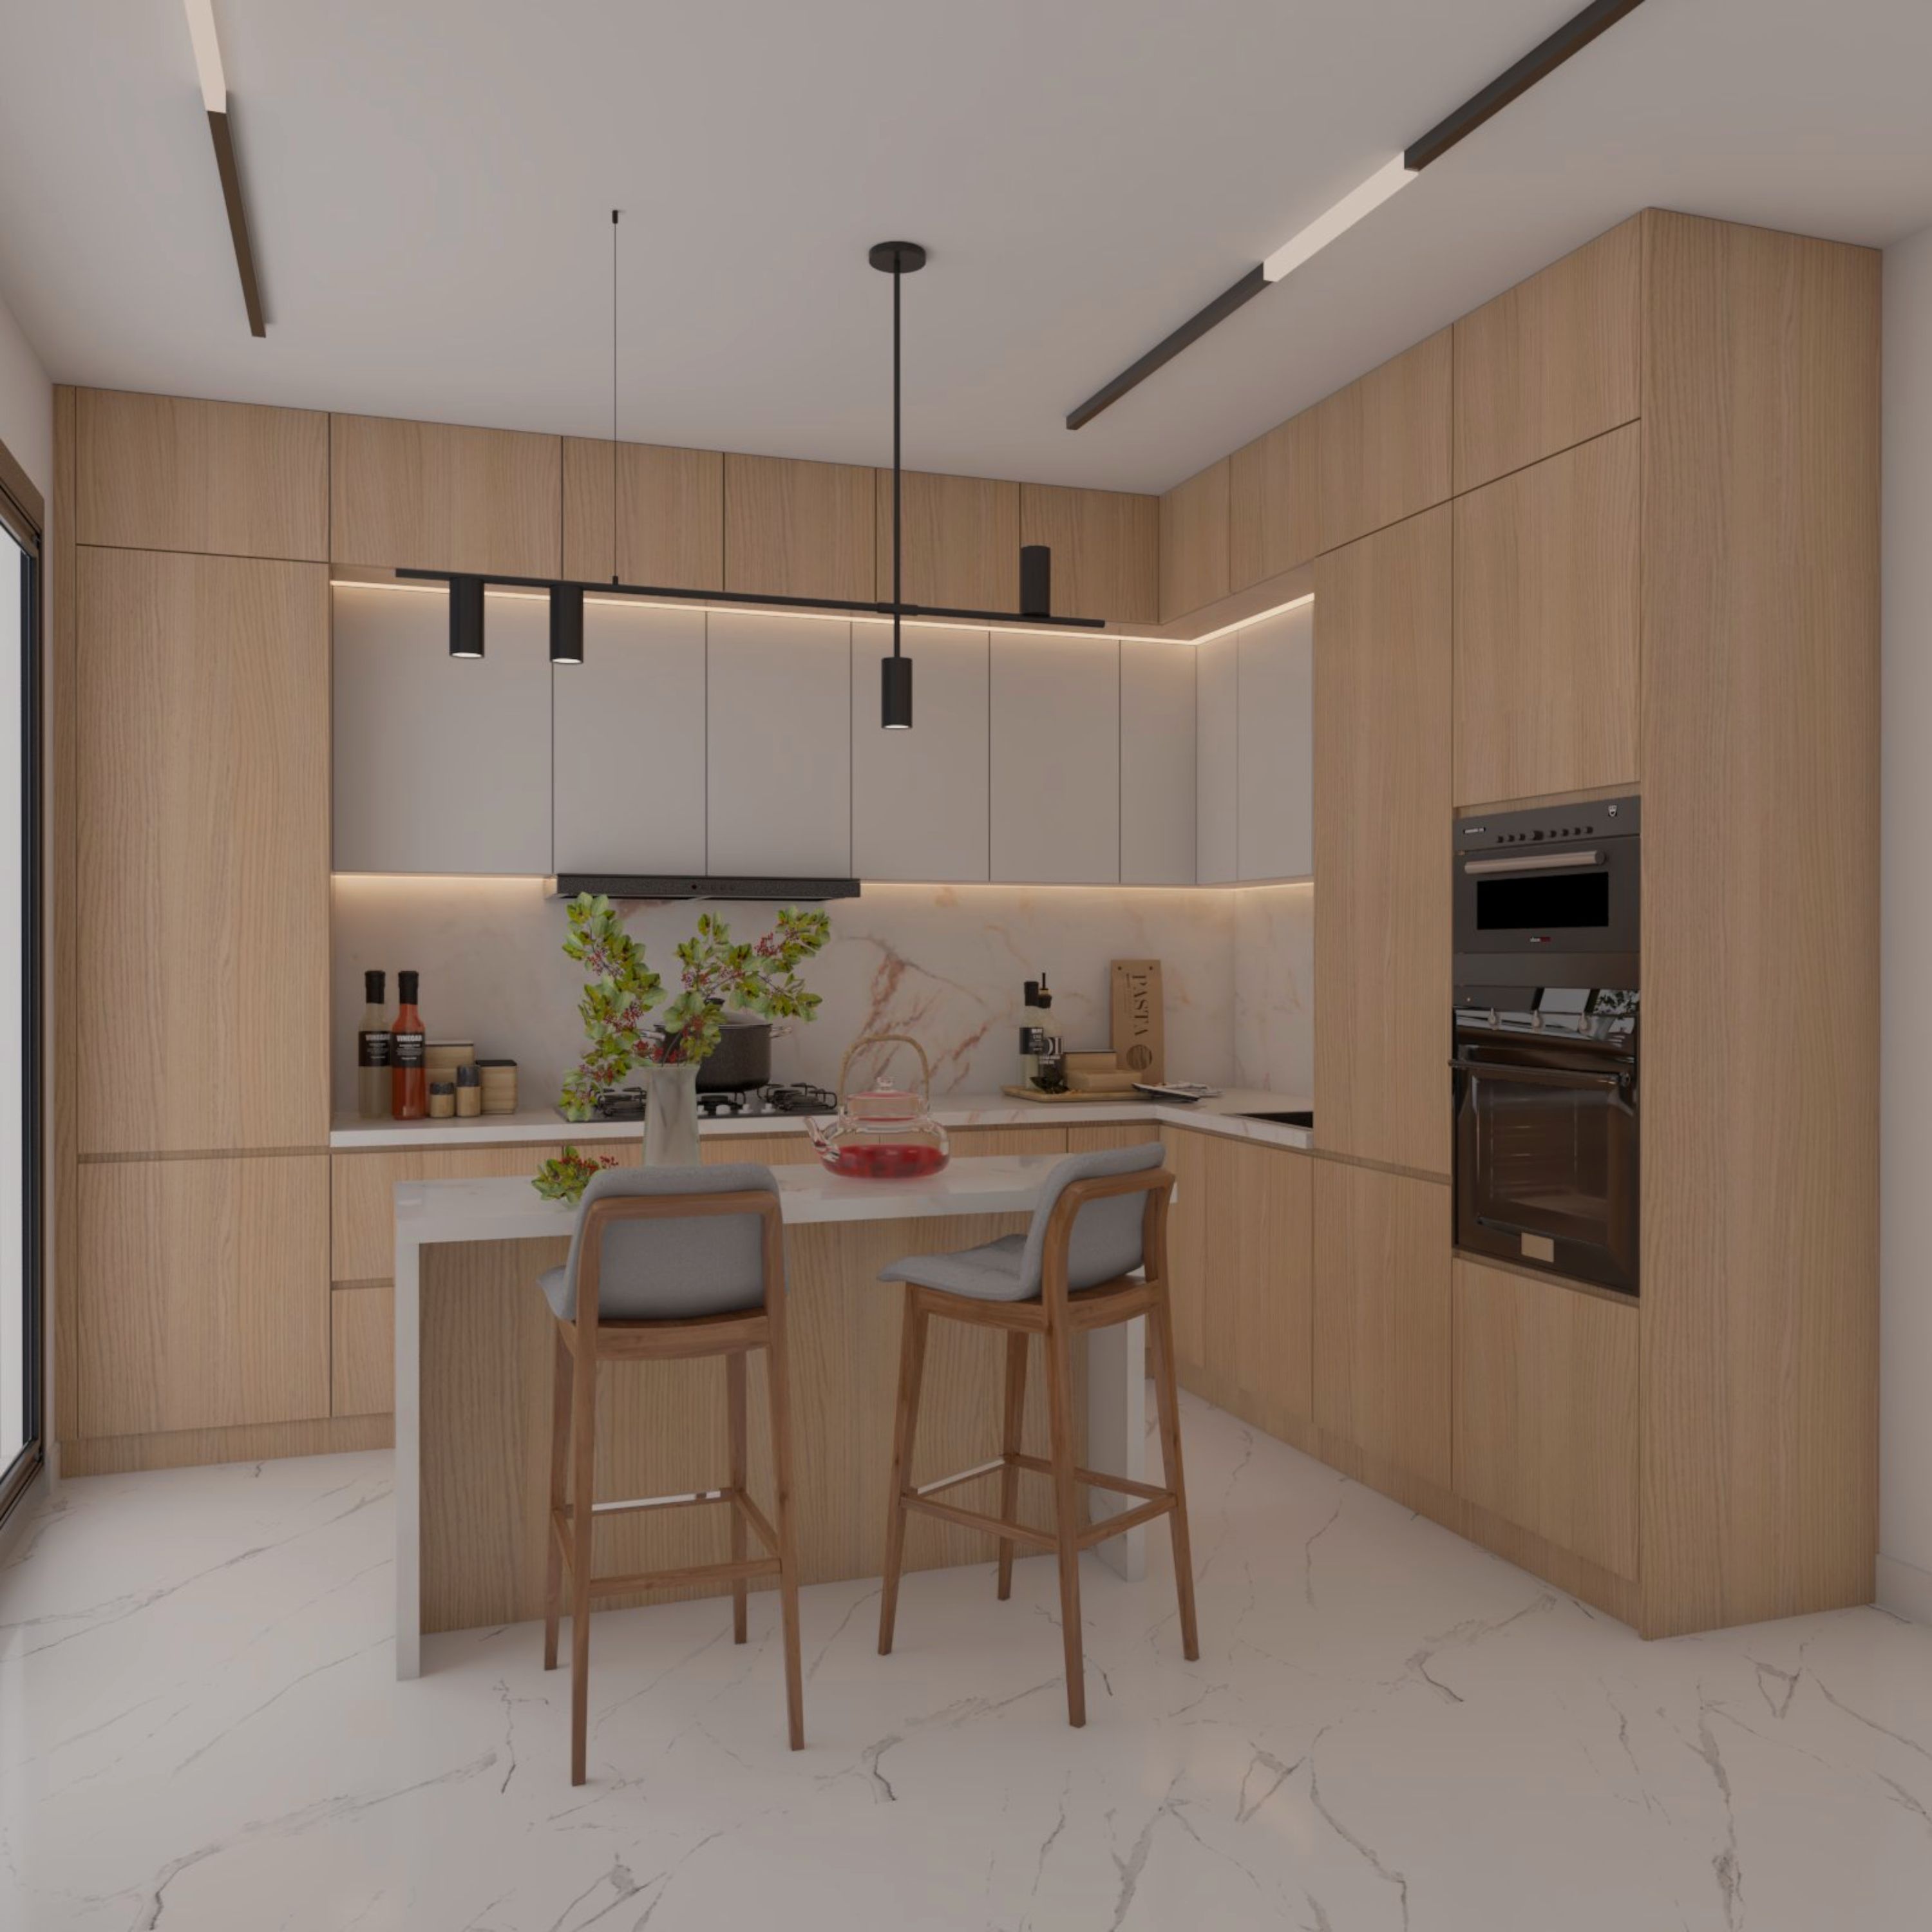 Classic Wood And White L Shaped Kitchen Design With Kitchen Island